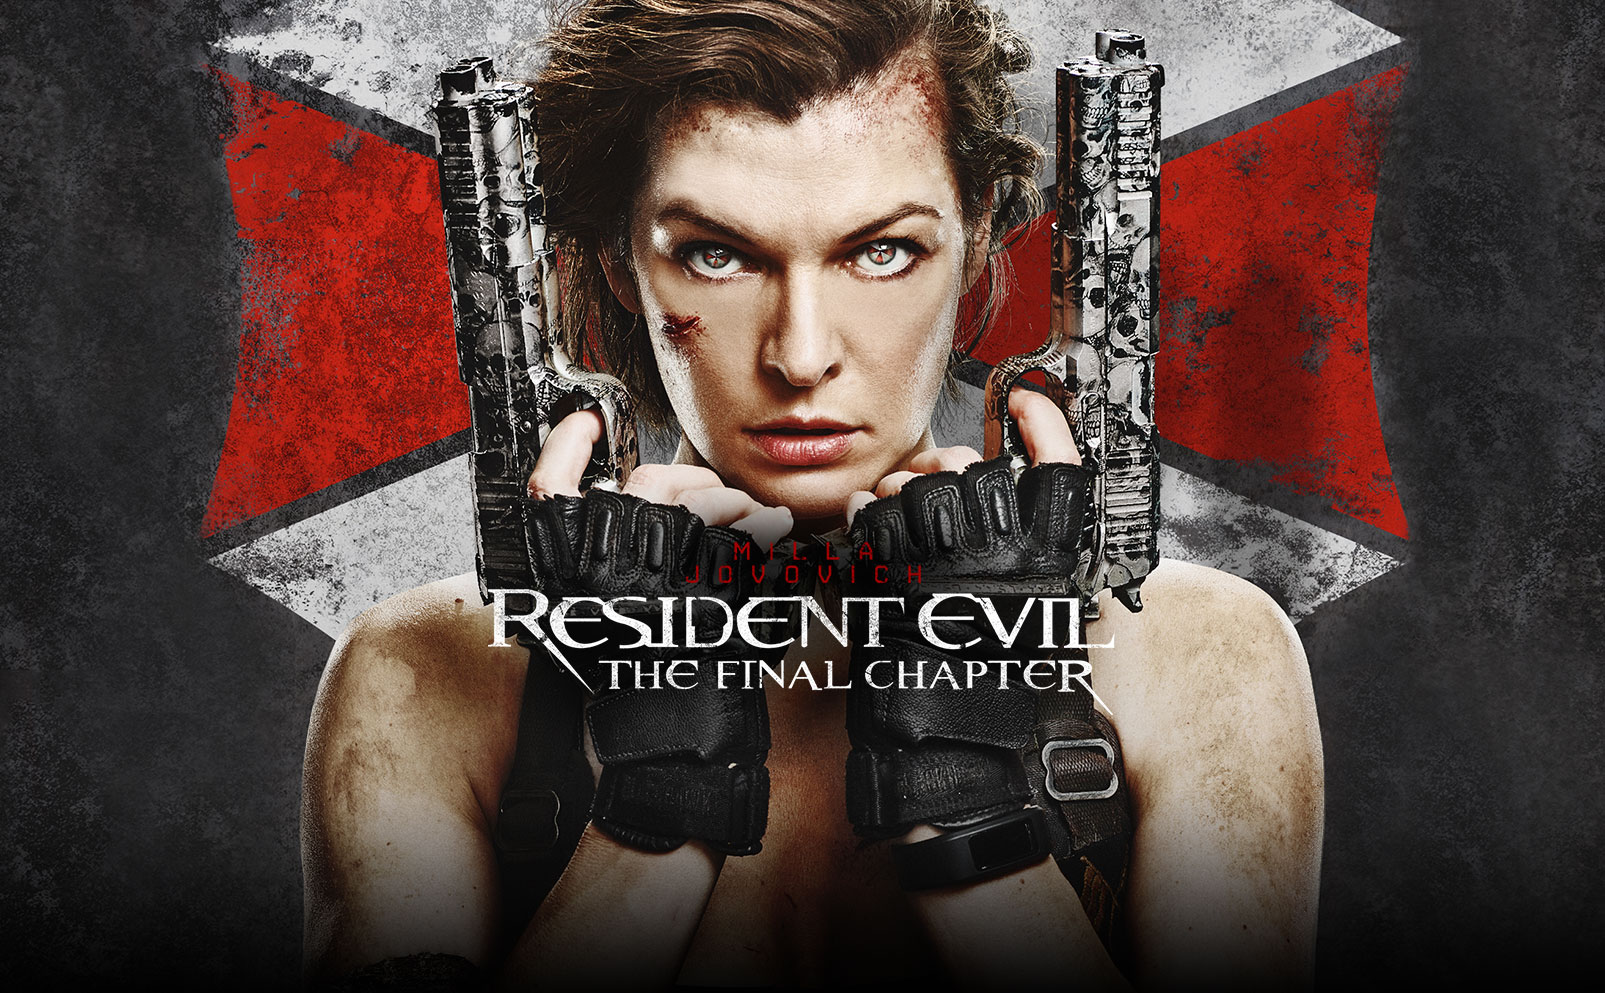 Resident Evil: The Final Chapter (2016) movie poster